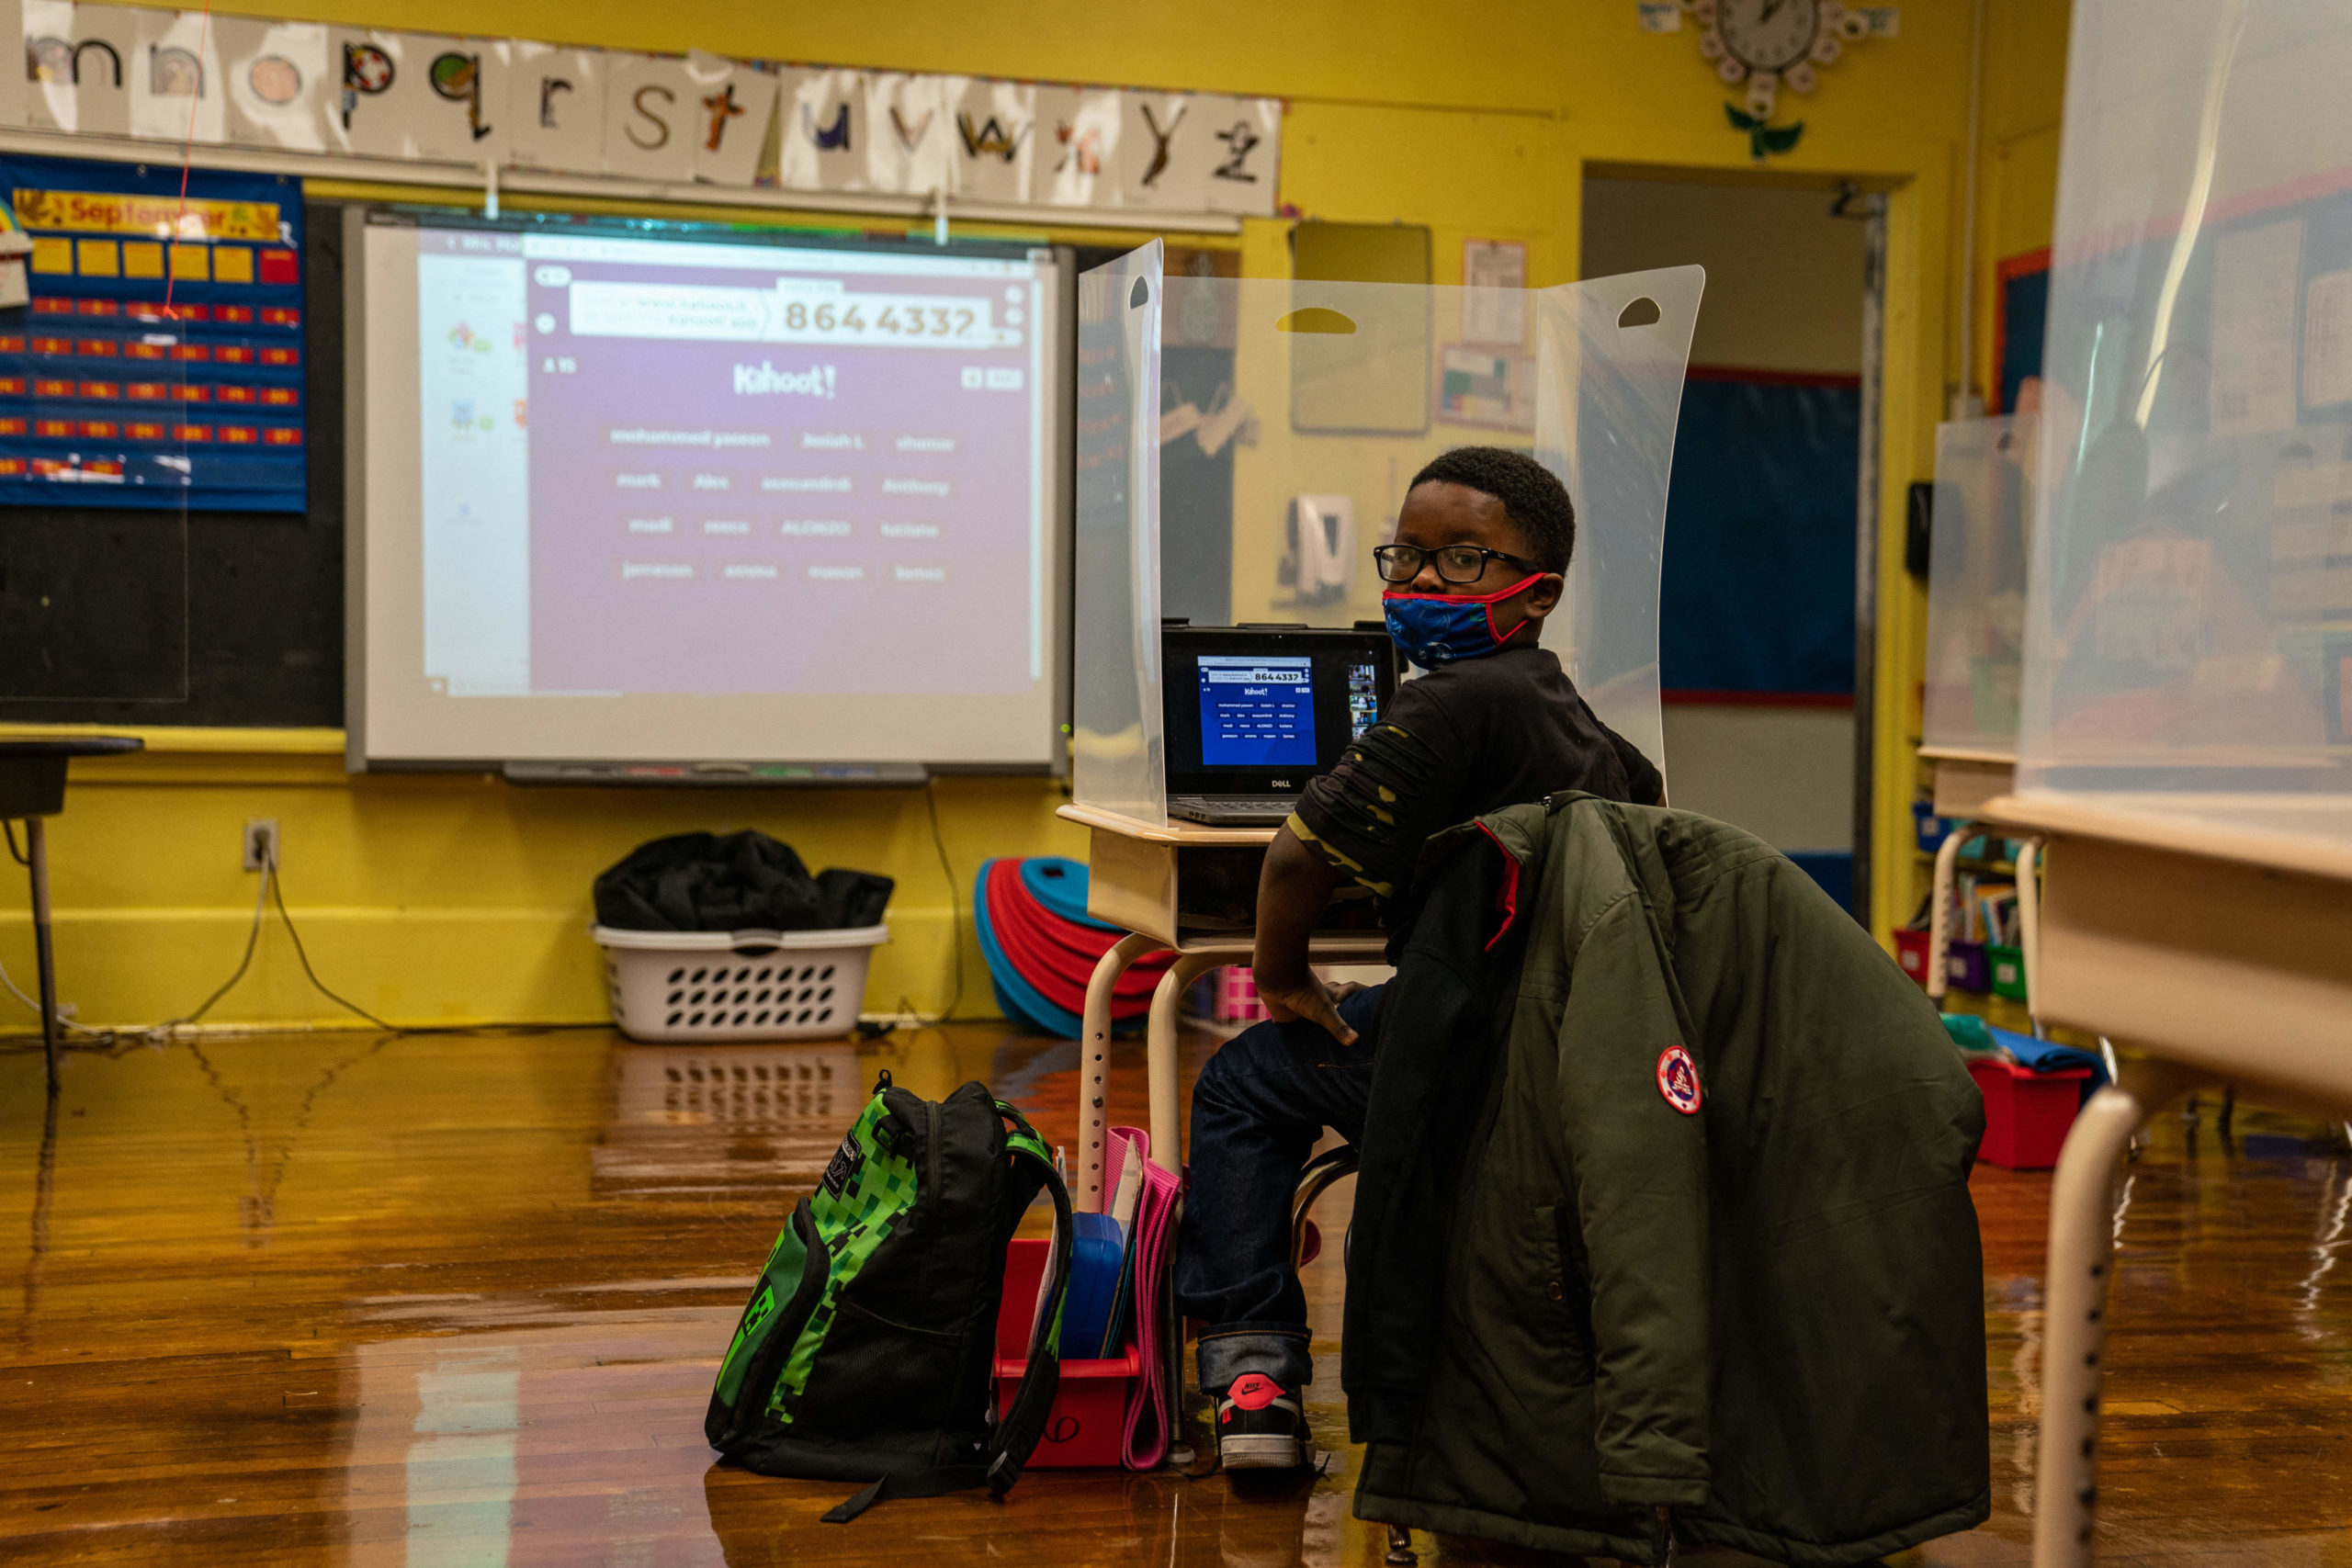 A students waits for First Lady Jill Biden to arrive to his classroom at the Samuel Smith Elementary School in Burlington, New Jersey on March 15, 2021. (Photo by Anna Moneymaker / POOL / AFP) (Photo by ANNA MONEYMAKER/POOL/AFP via Getty Images)